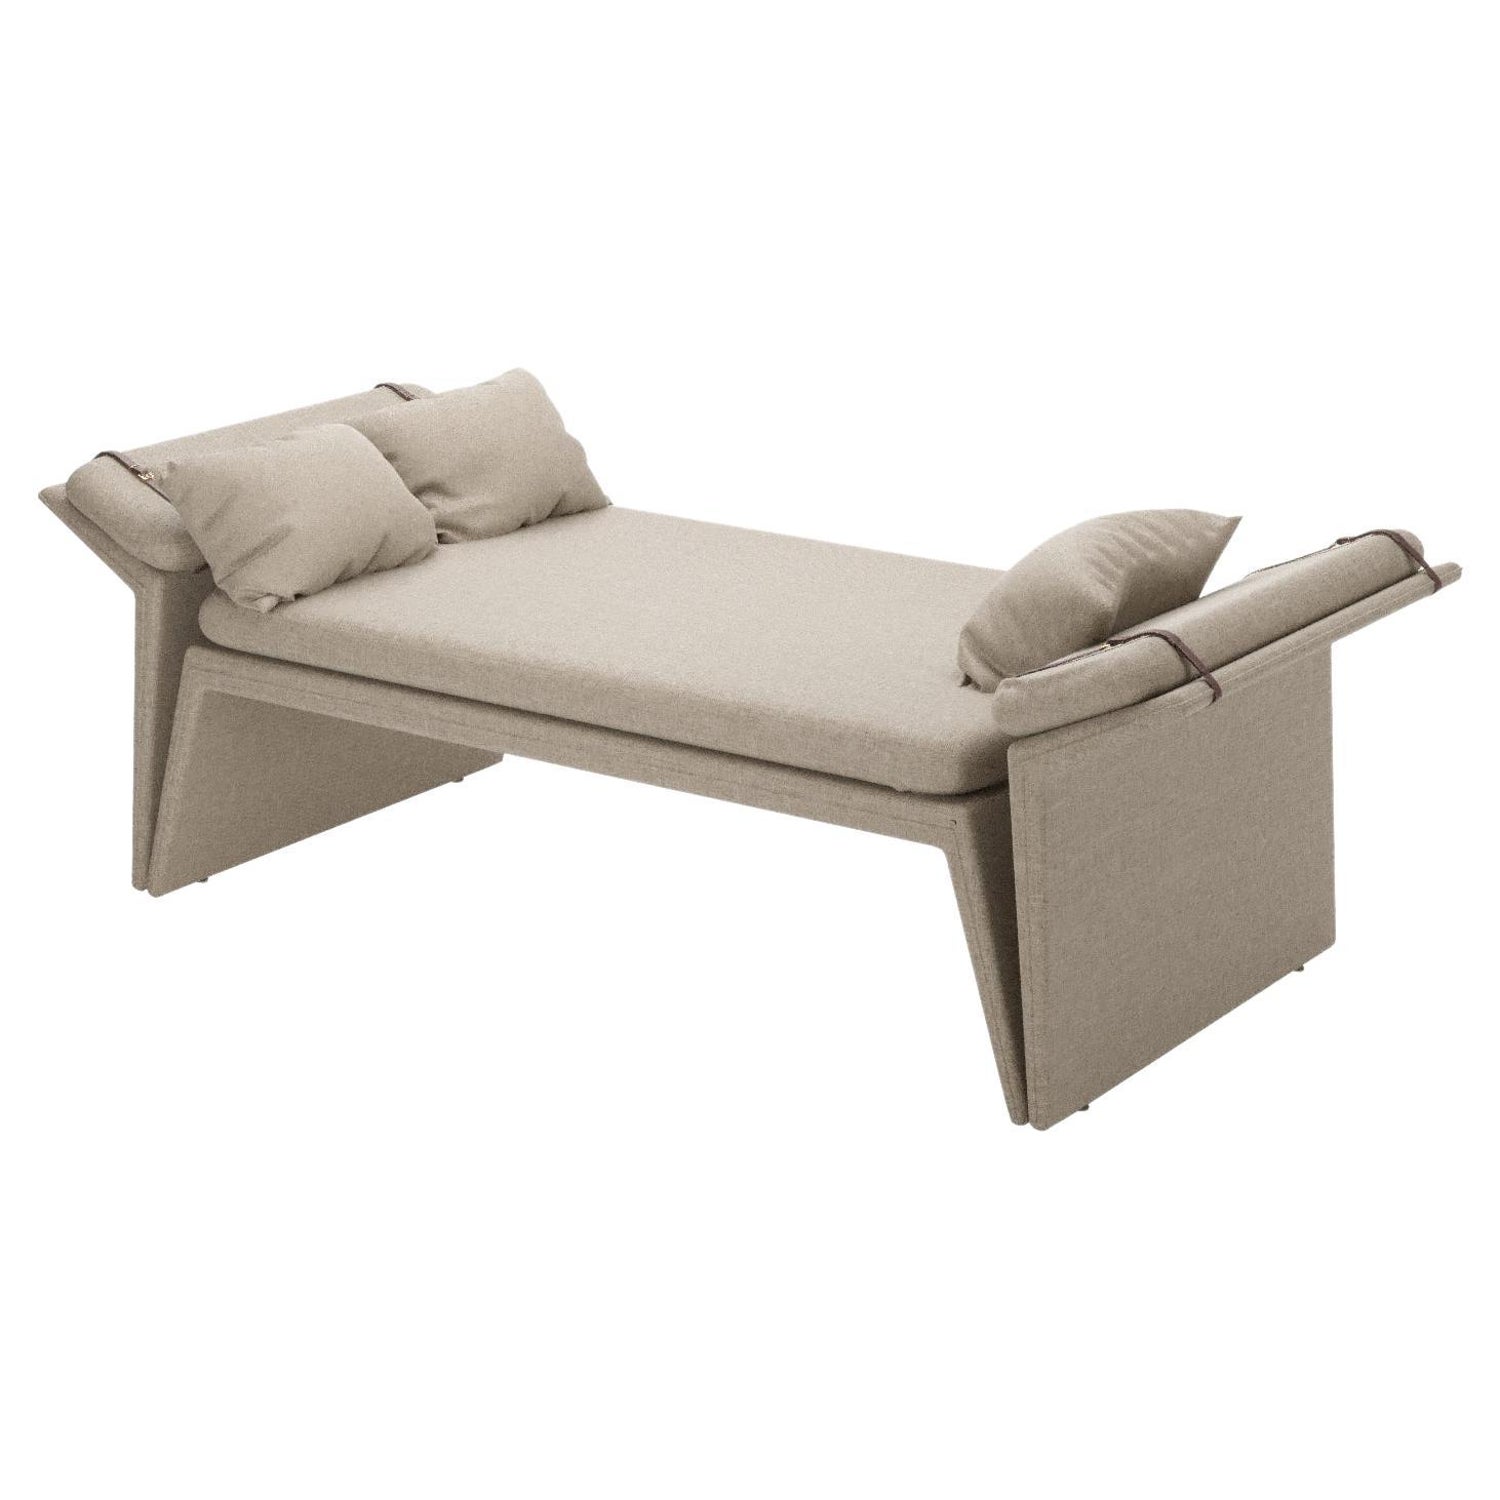 Natural Linen Modern Panama Chaise Longue For Sale at 1stDibs